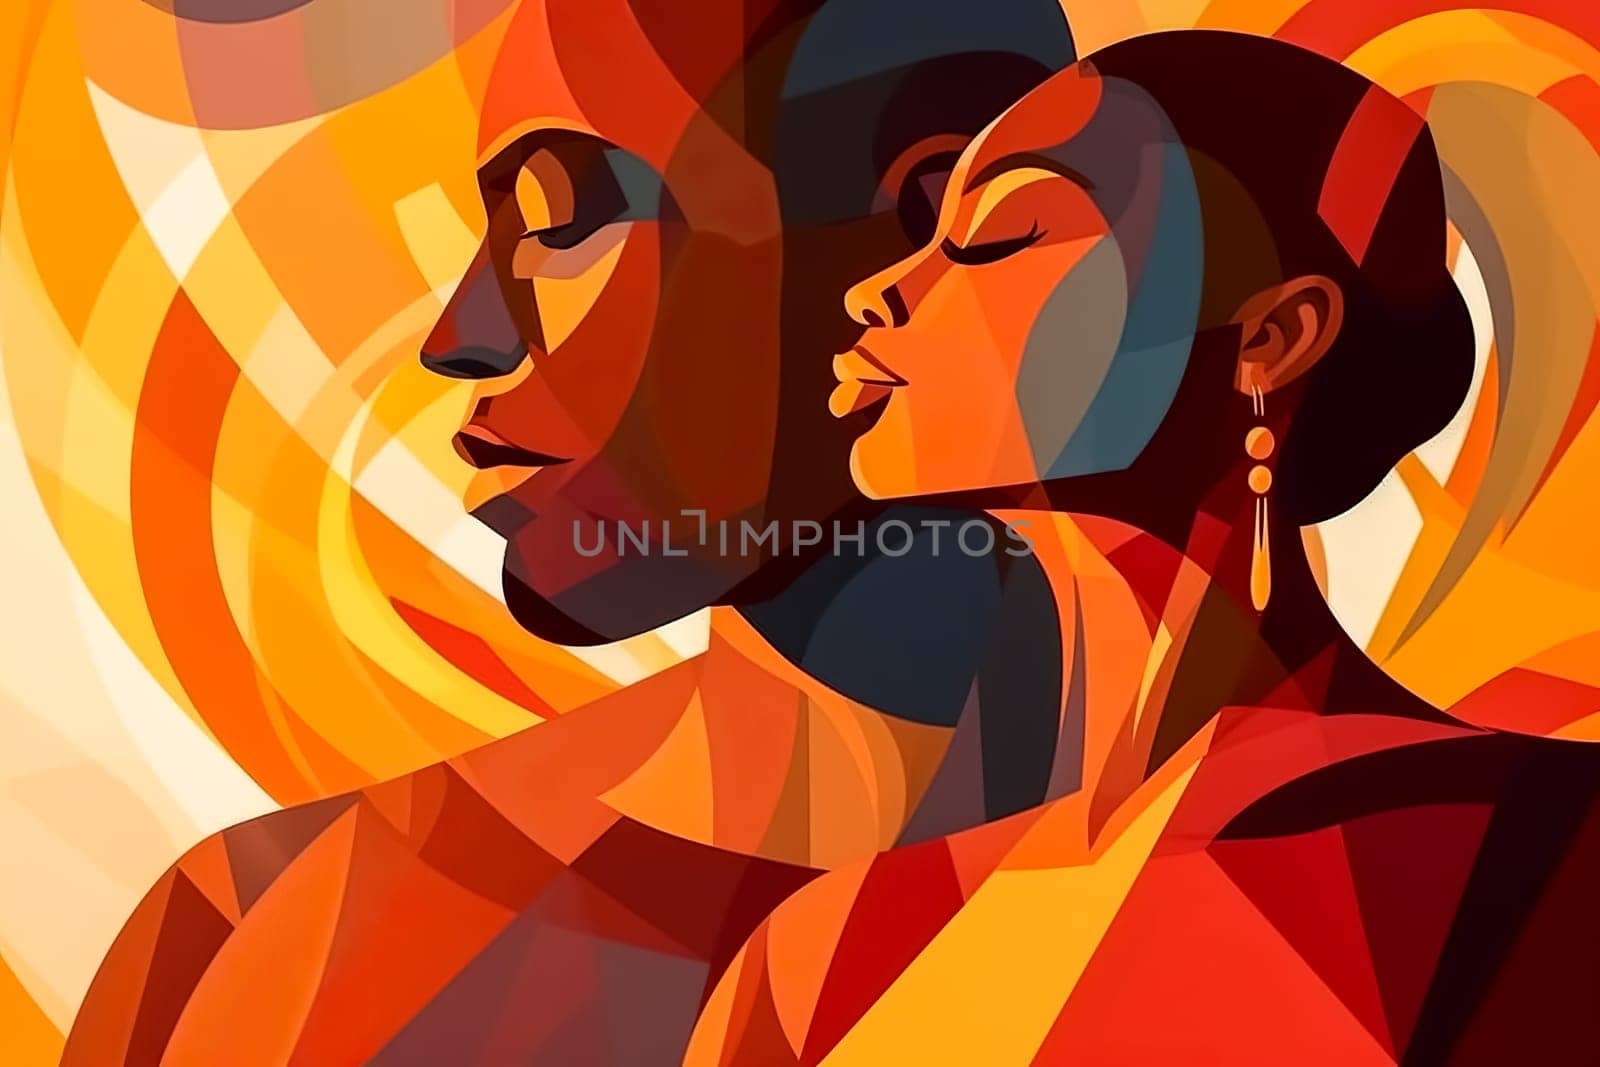 Experience the tender embrace of love with an illustration capturing an African couple sharing a passionate kiss.